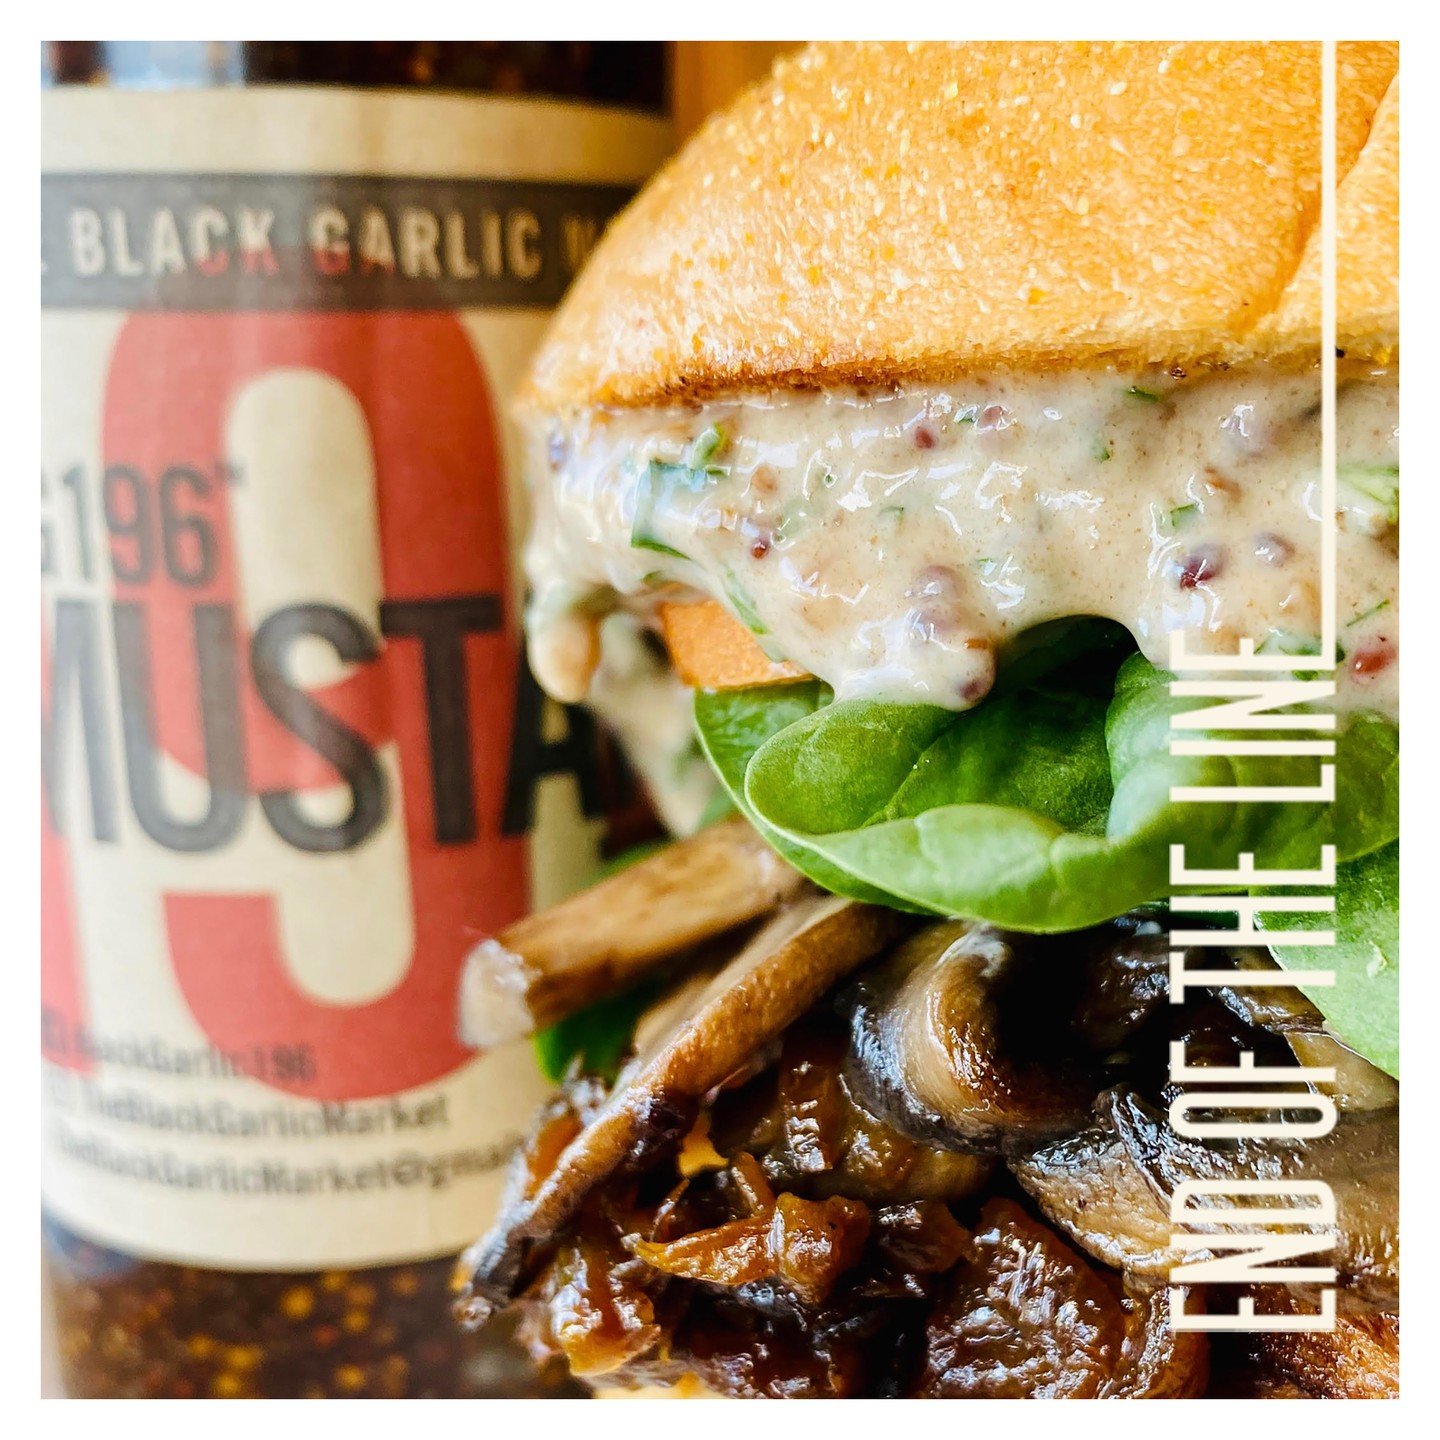 Stop by End of the Line this weekend and grab a Black Garlic Bacon Burger! Featuring house made black garlic mustard aioli, grilled onions, mushrooms, spinach and tomato, all on a fresh bun. Pairs perfectly with one of our sensational signature sides